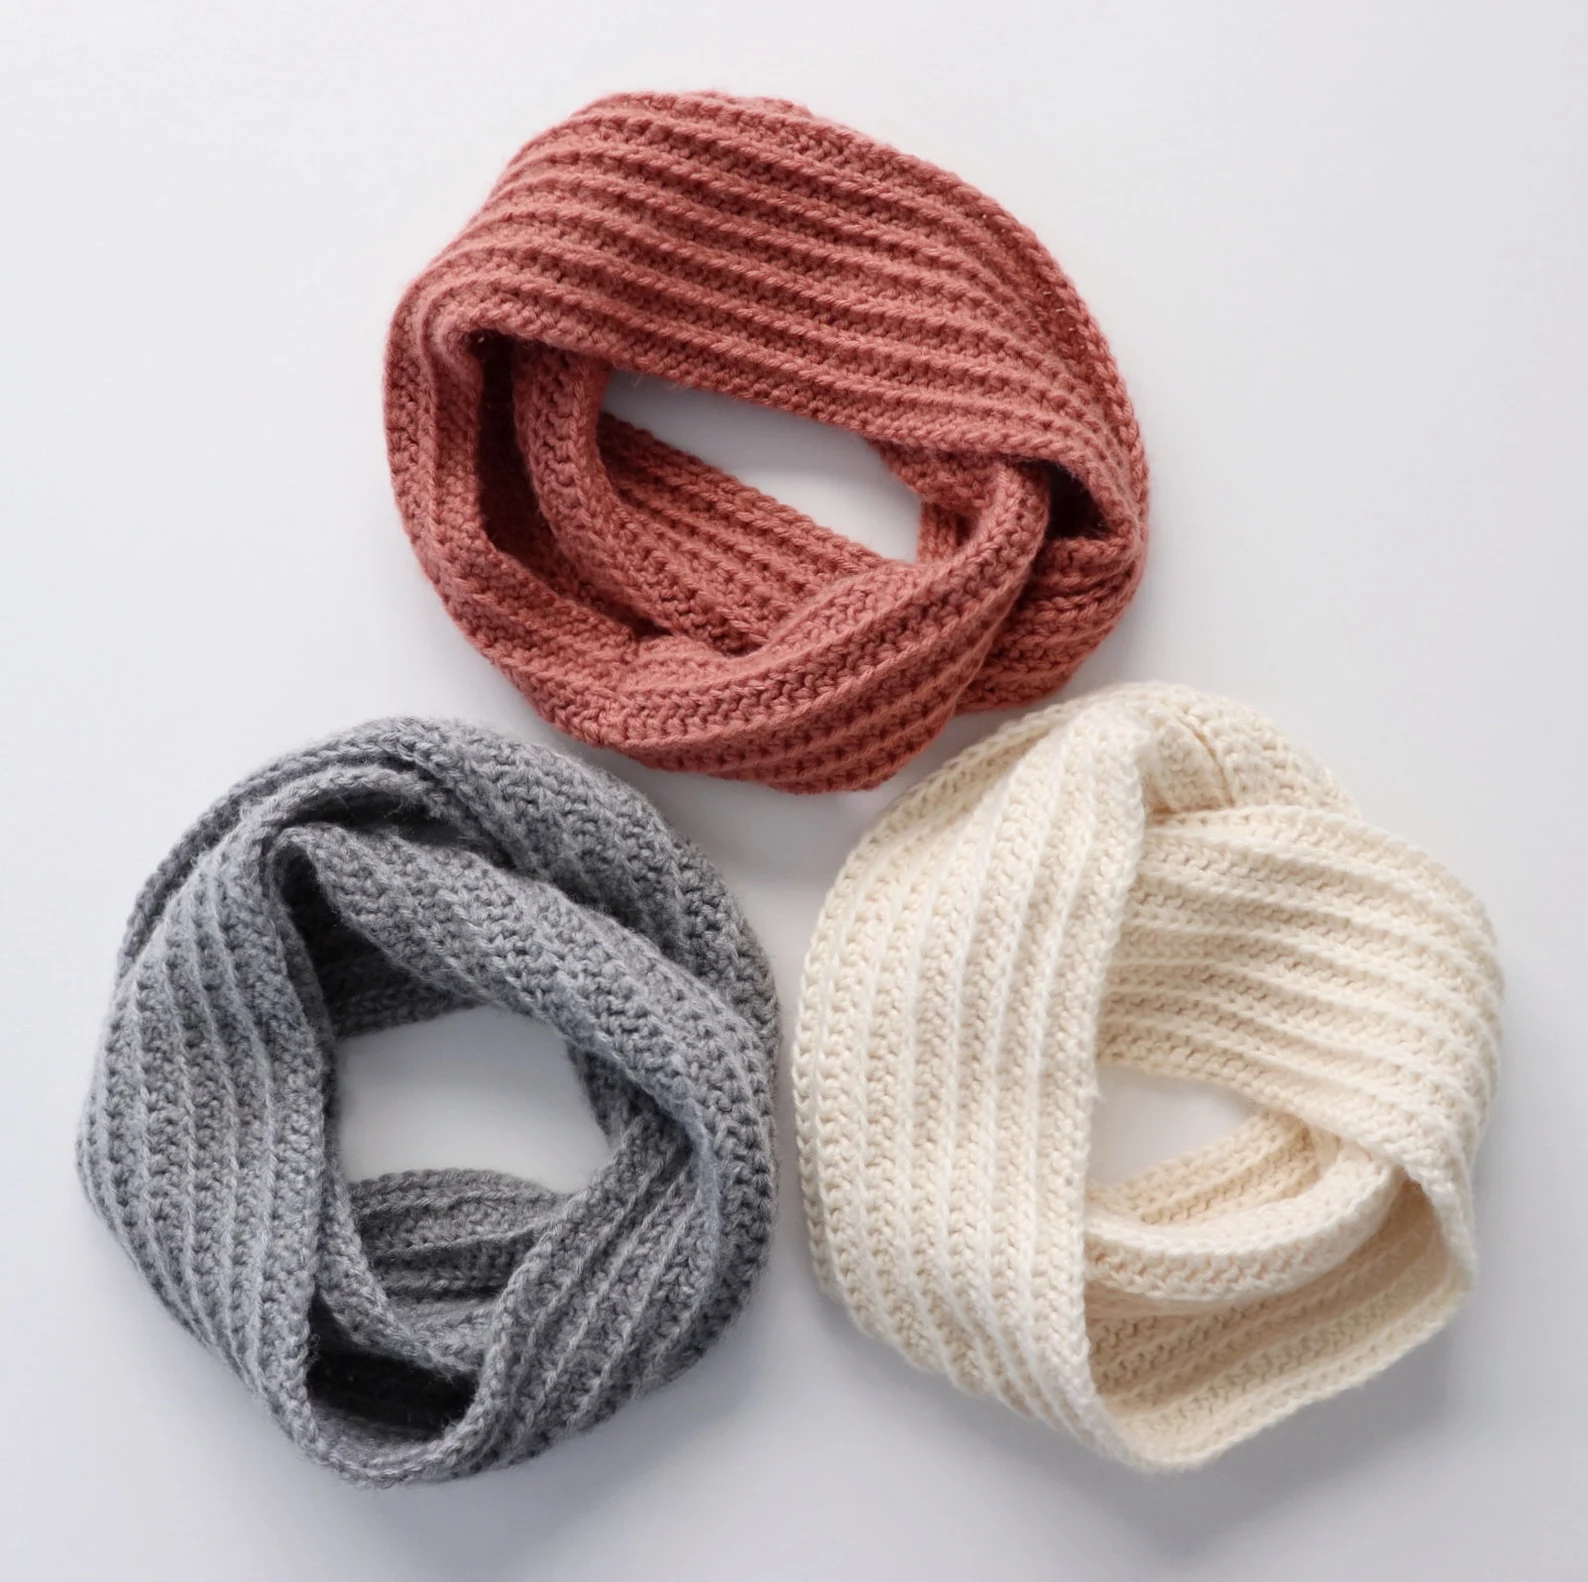 25 Infinity Scarf Crochet Patterns to Keep You Warm - I Can